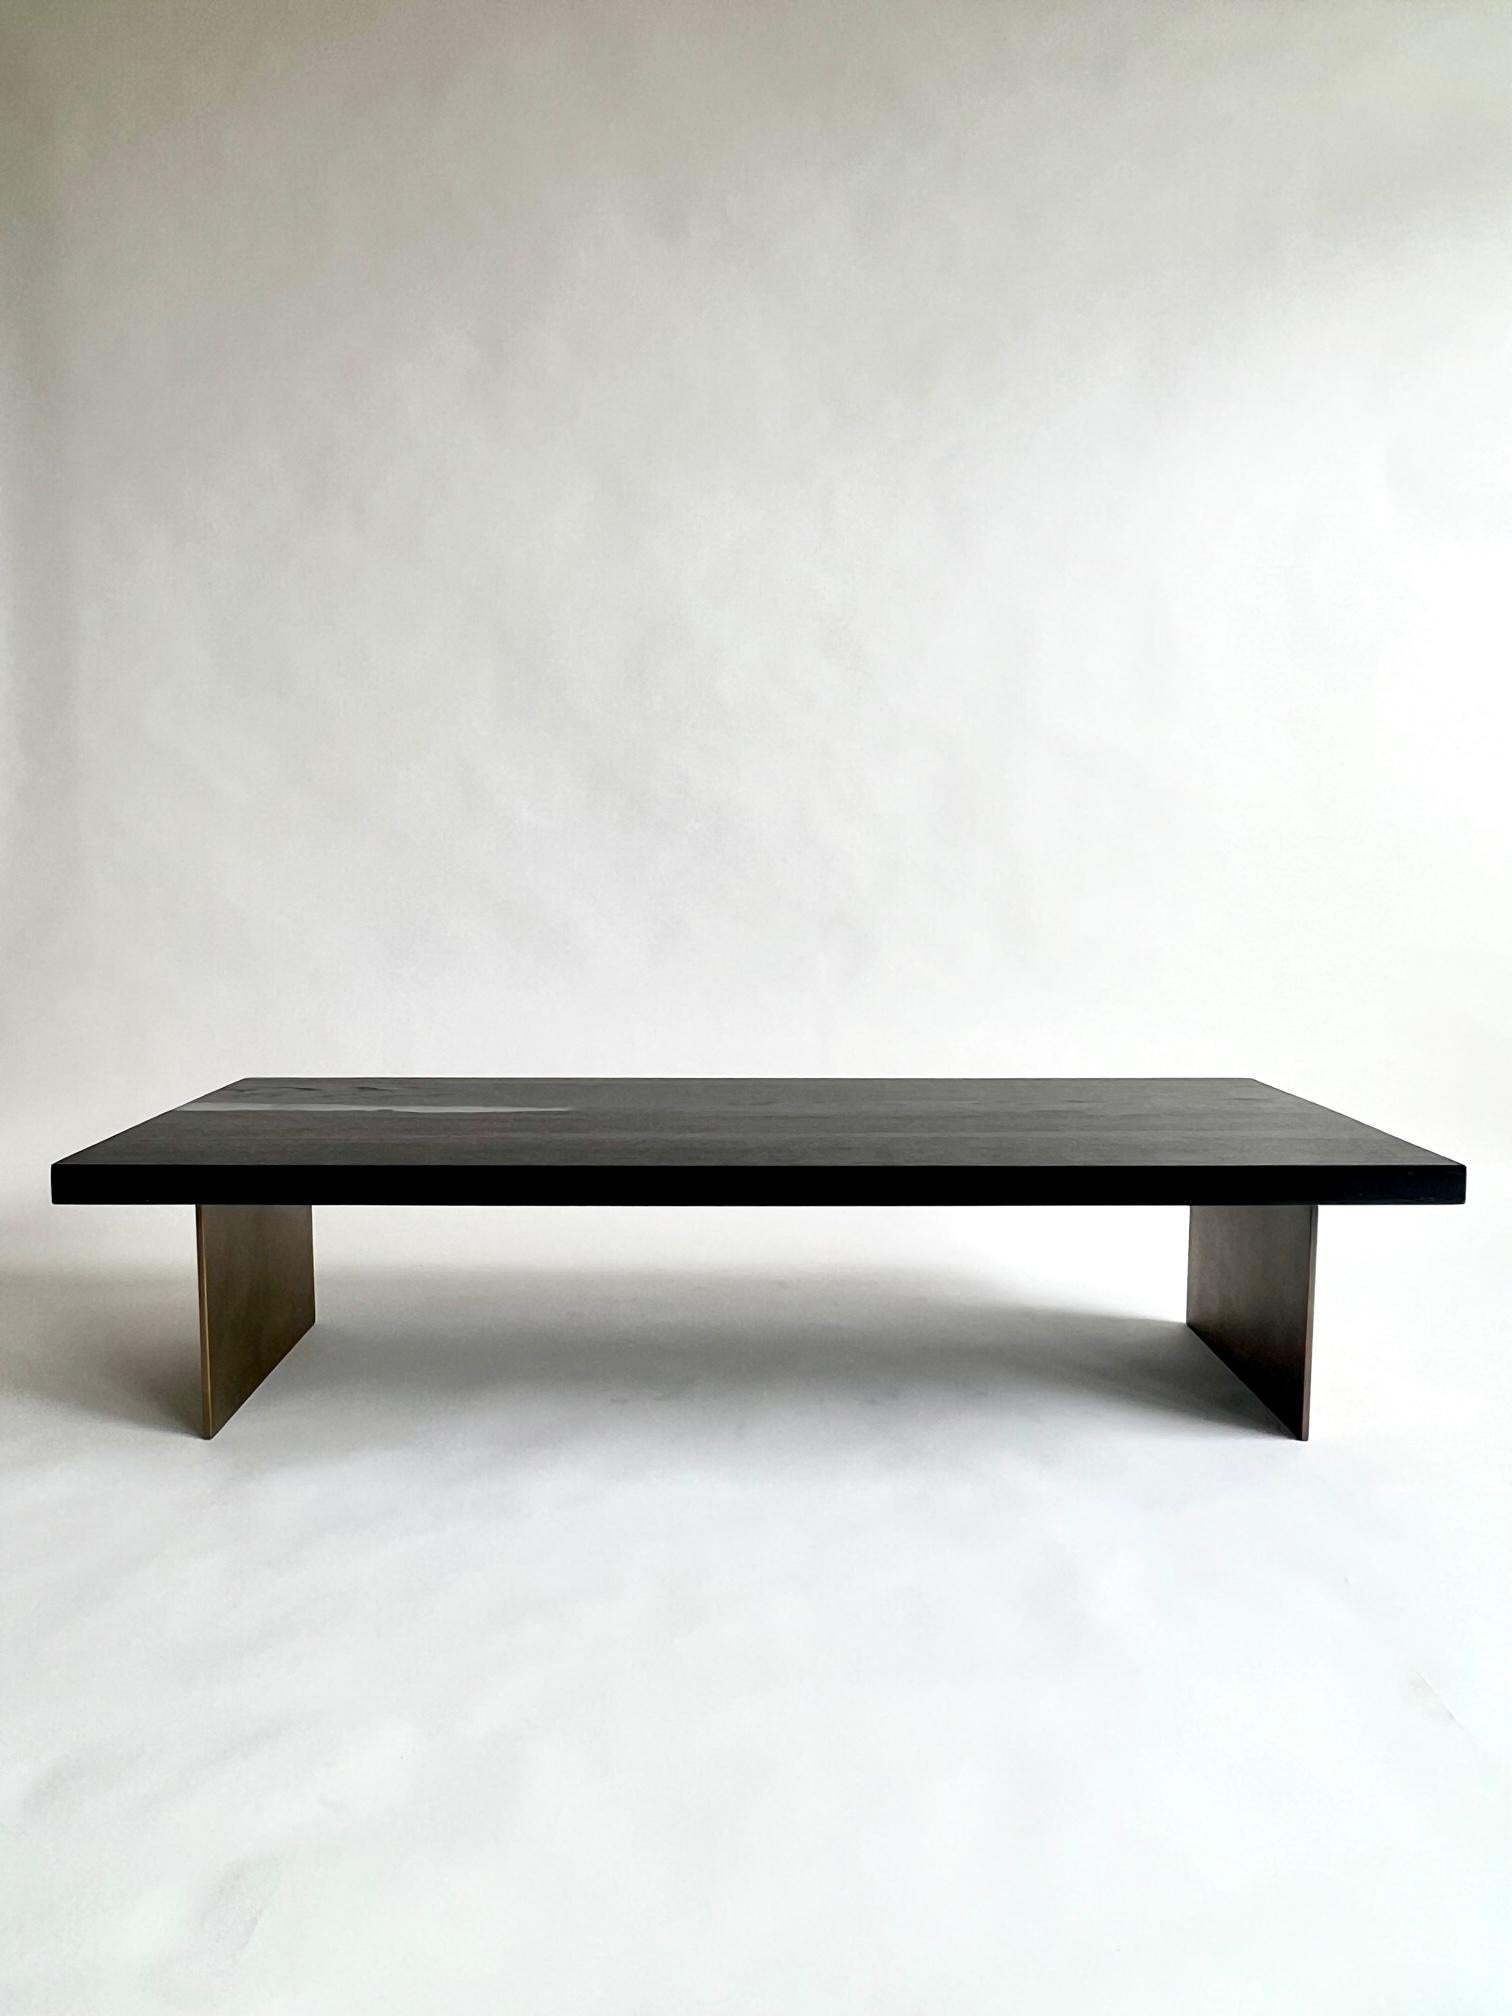 Introducing an extraordinary coffee table carefully crafted from ancient Bog Oak and strong epoxy resin. This remarkable piece showcases wood that is an astonishing 7,000 years old, sourced from Romania. The wood's incredible preservation is thanks